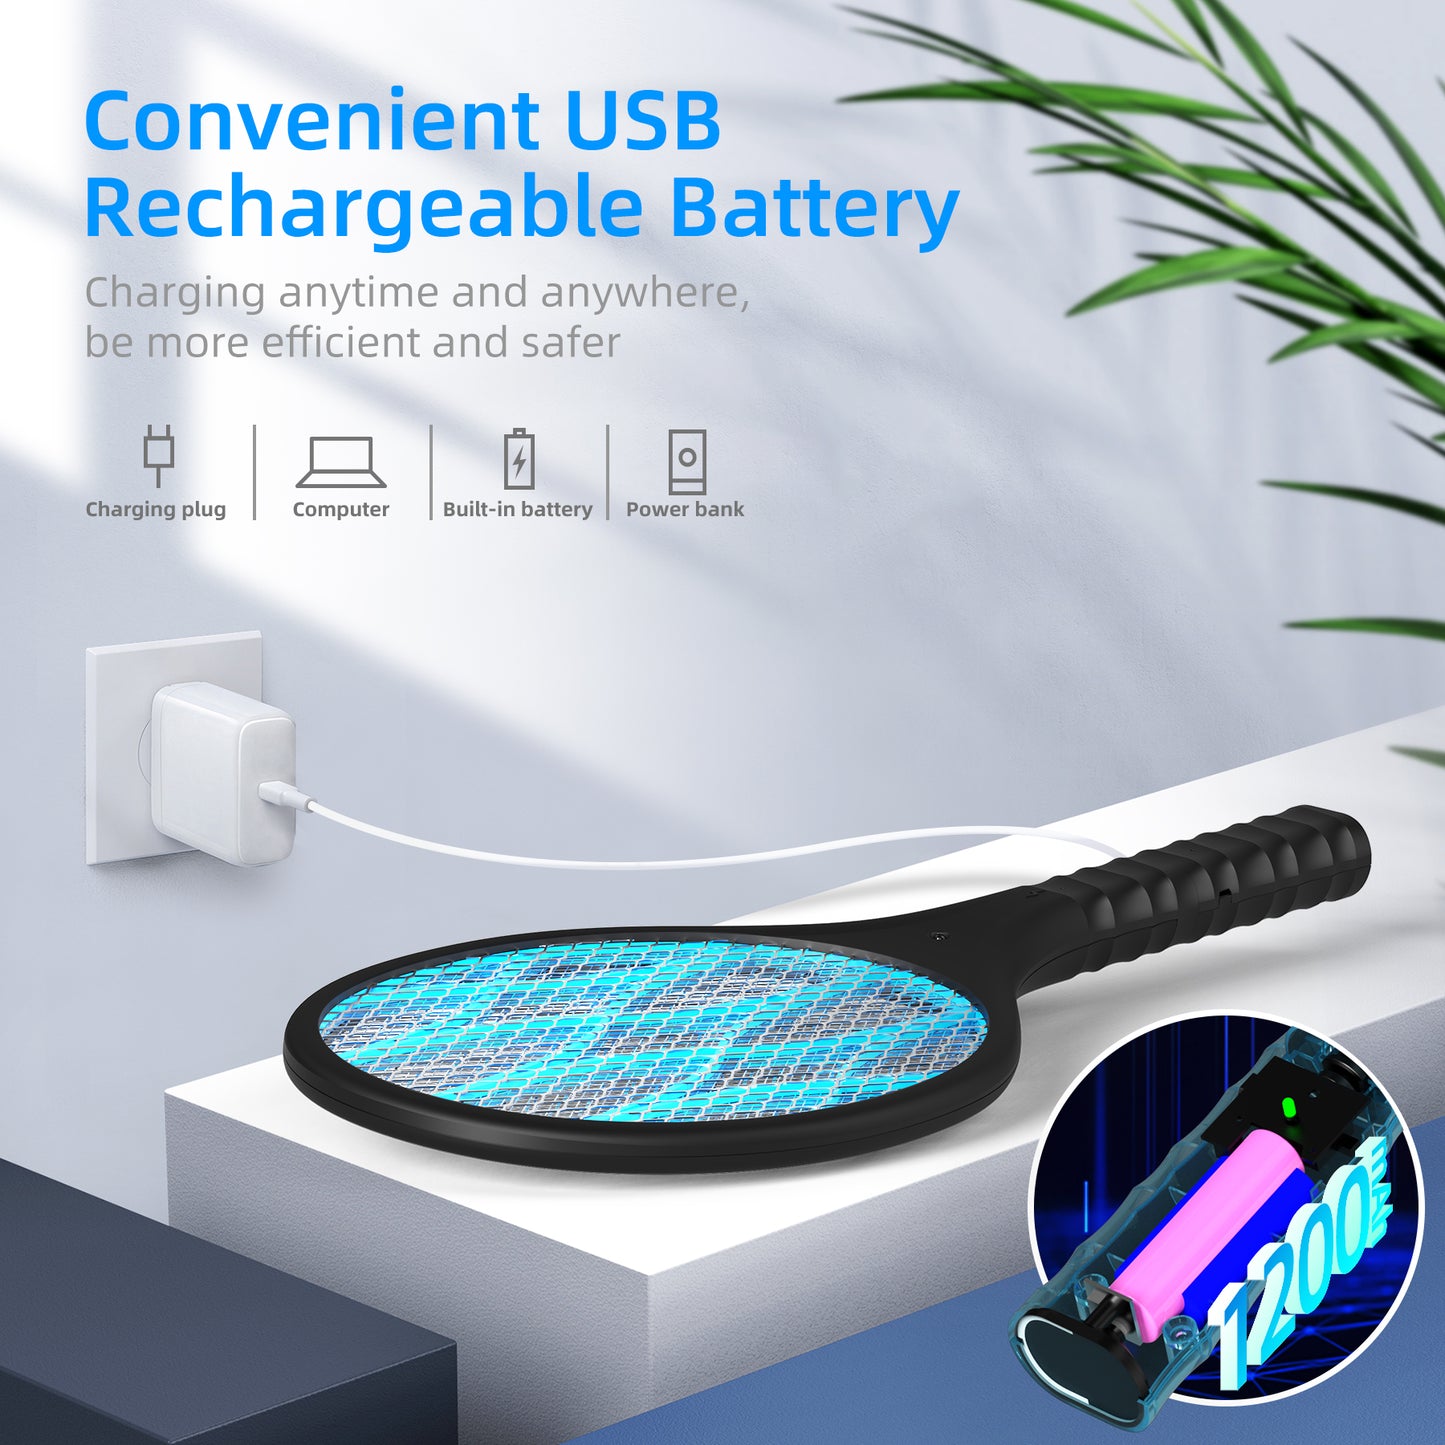 ALROCKET Intelabe Bug Zapper, Mosquito Killer USB Rechargeable Electric Fly Swatter for Home, Outdoor